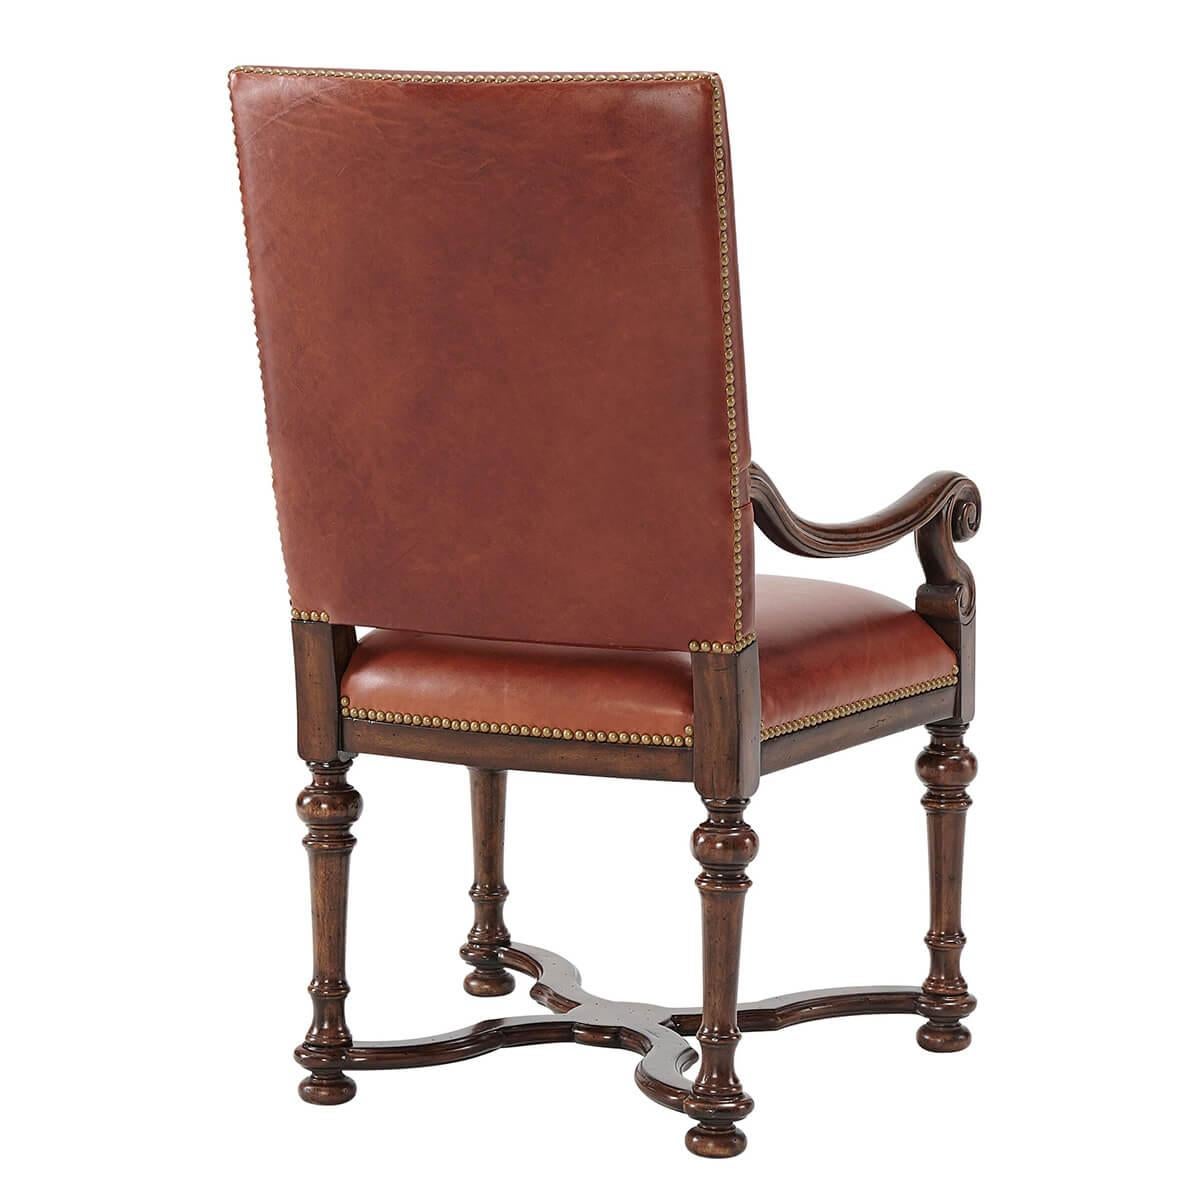 An early English William and Mary style hand carved dining armchair, with a rectangular padded back and an upholstered seat on turned tapering legs joined by a wavy ‘X’ stretcher. 

Dimensions: 24.5